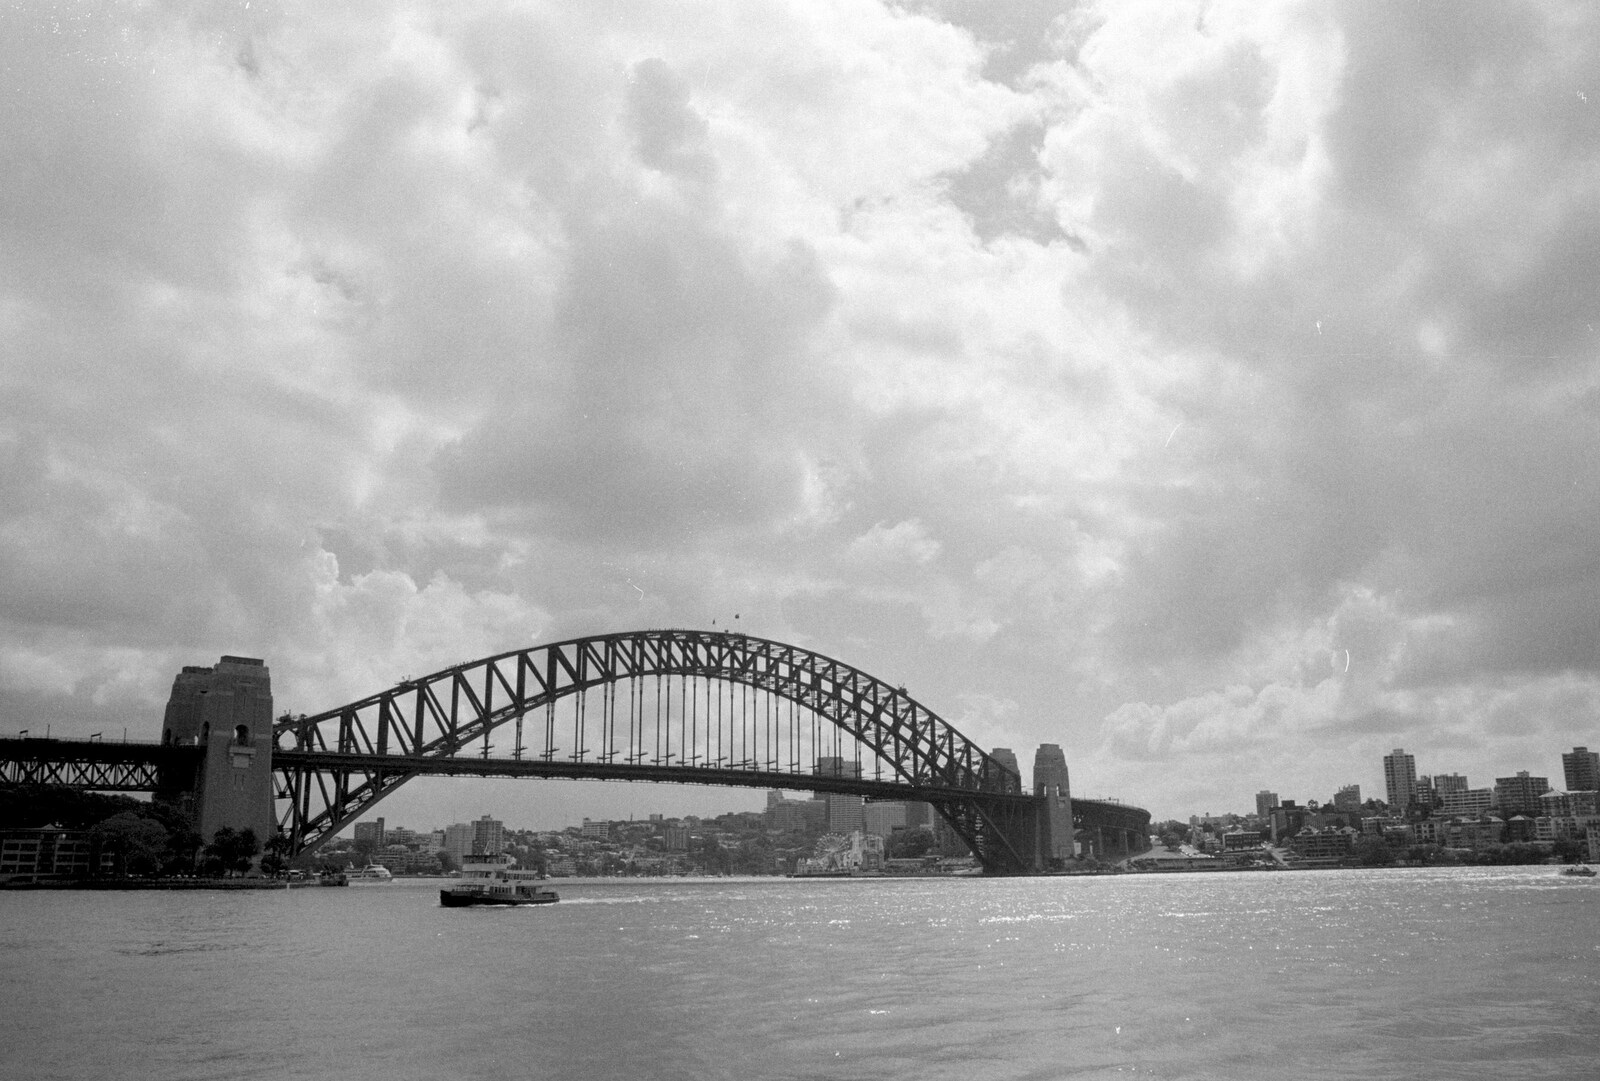 The harbour bridge (again) from A Trip to the Blue Mountains, New South Wales, Australia - 12th April 2000